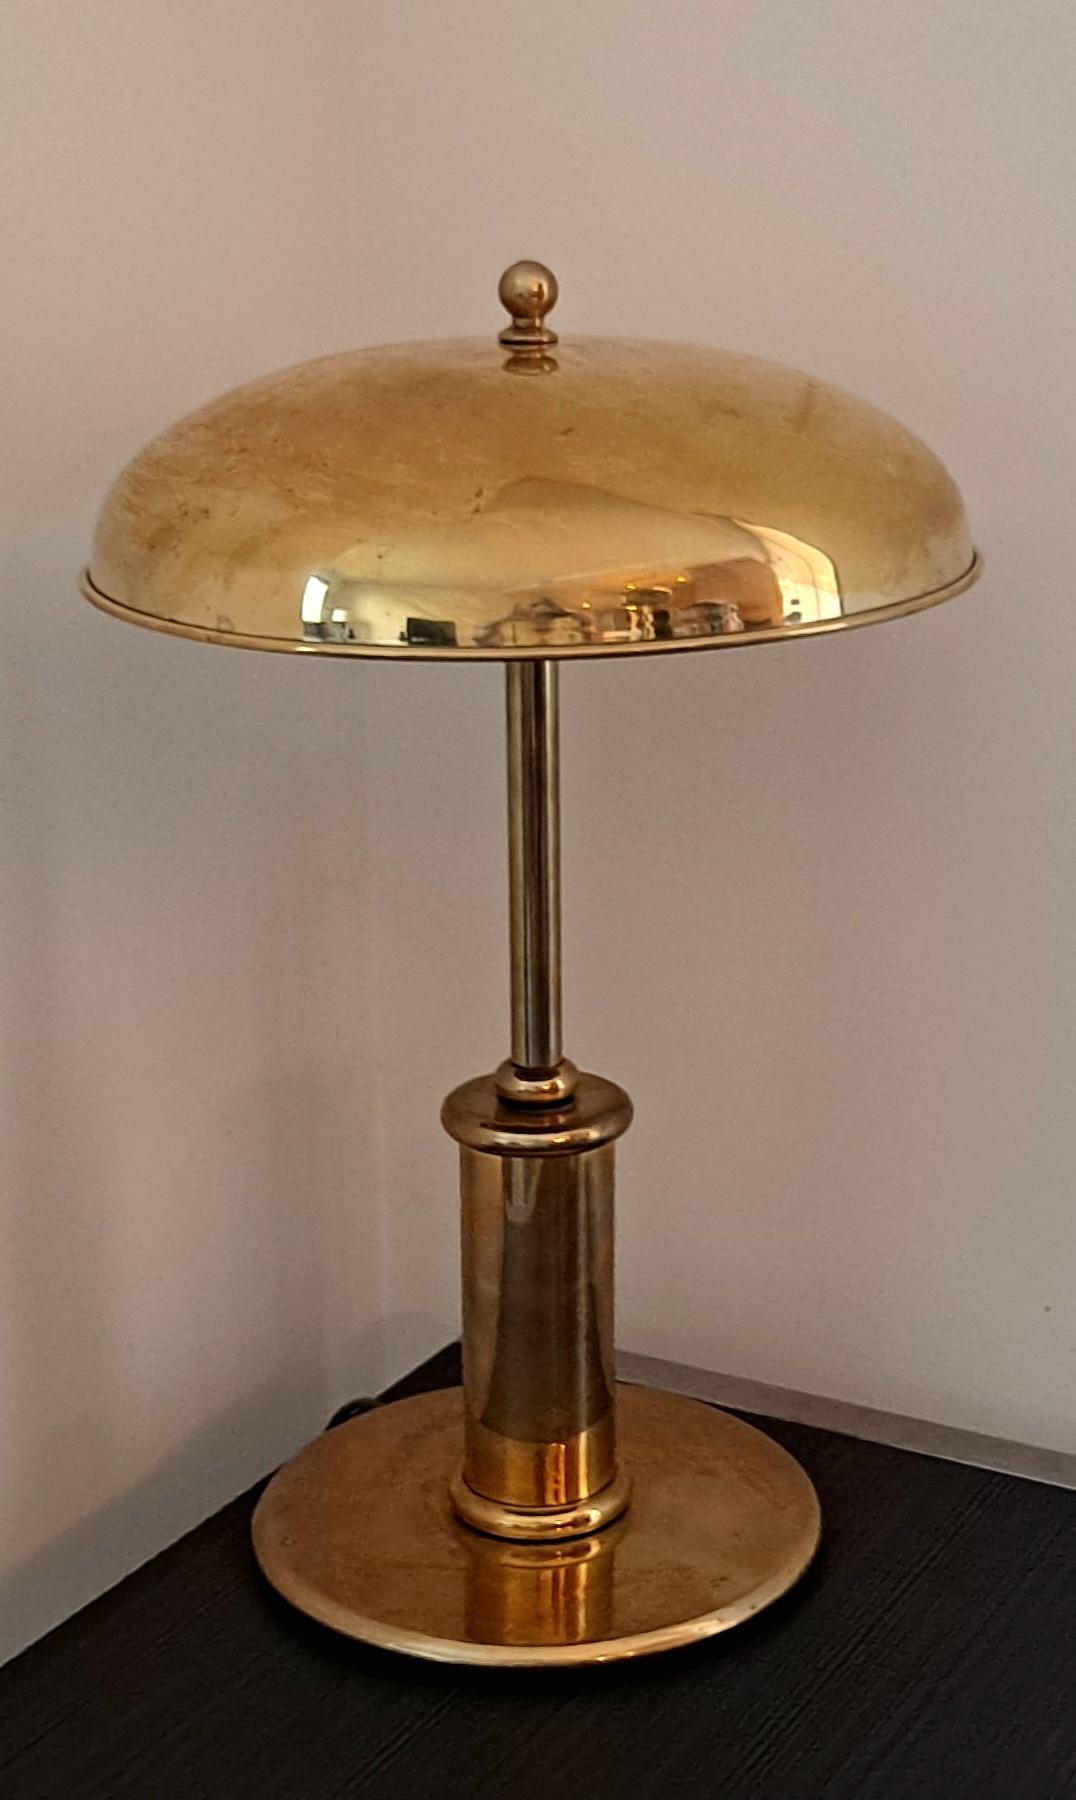 This Deco Brass table lamp from the 1950s  is a classic clean line table lamp with a high quality brass base and brass shade timeless design .